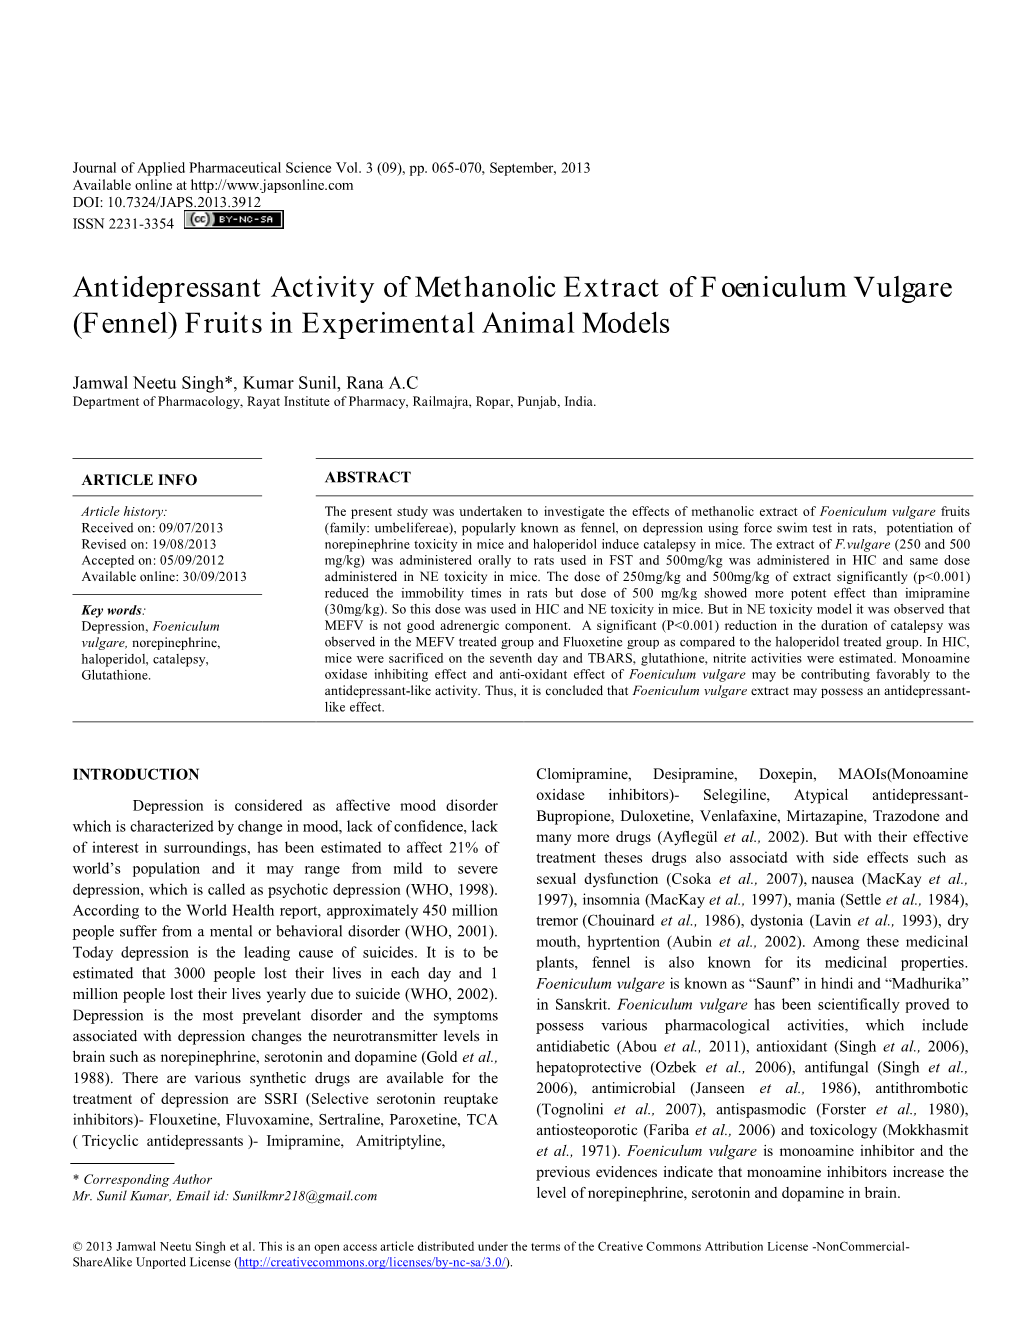 Antidepressant Activity of Methanolic Extract of Foeniculum Vulgare (Fennel) Fruits in Experimental Animal Models